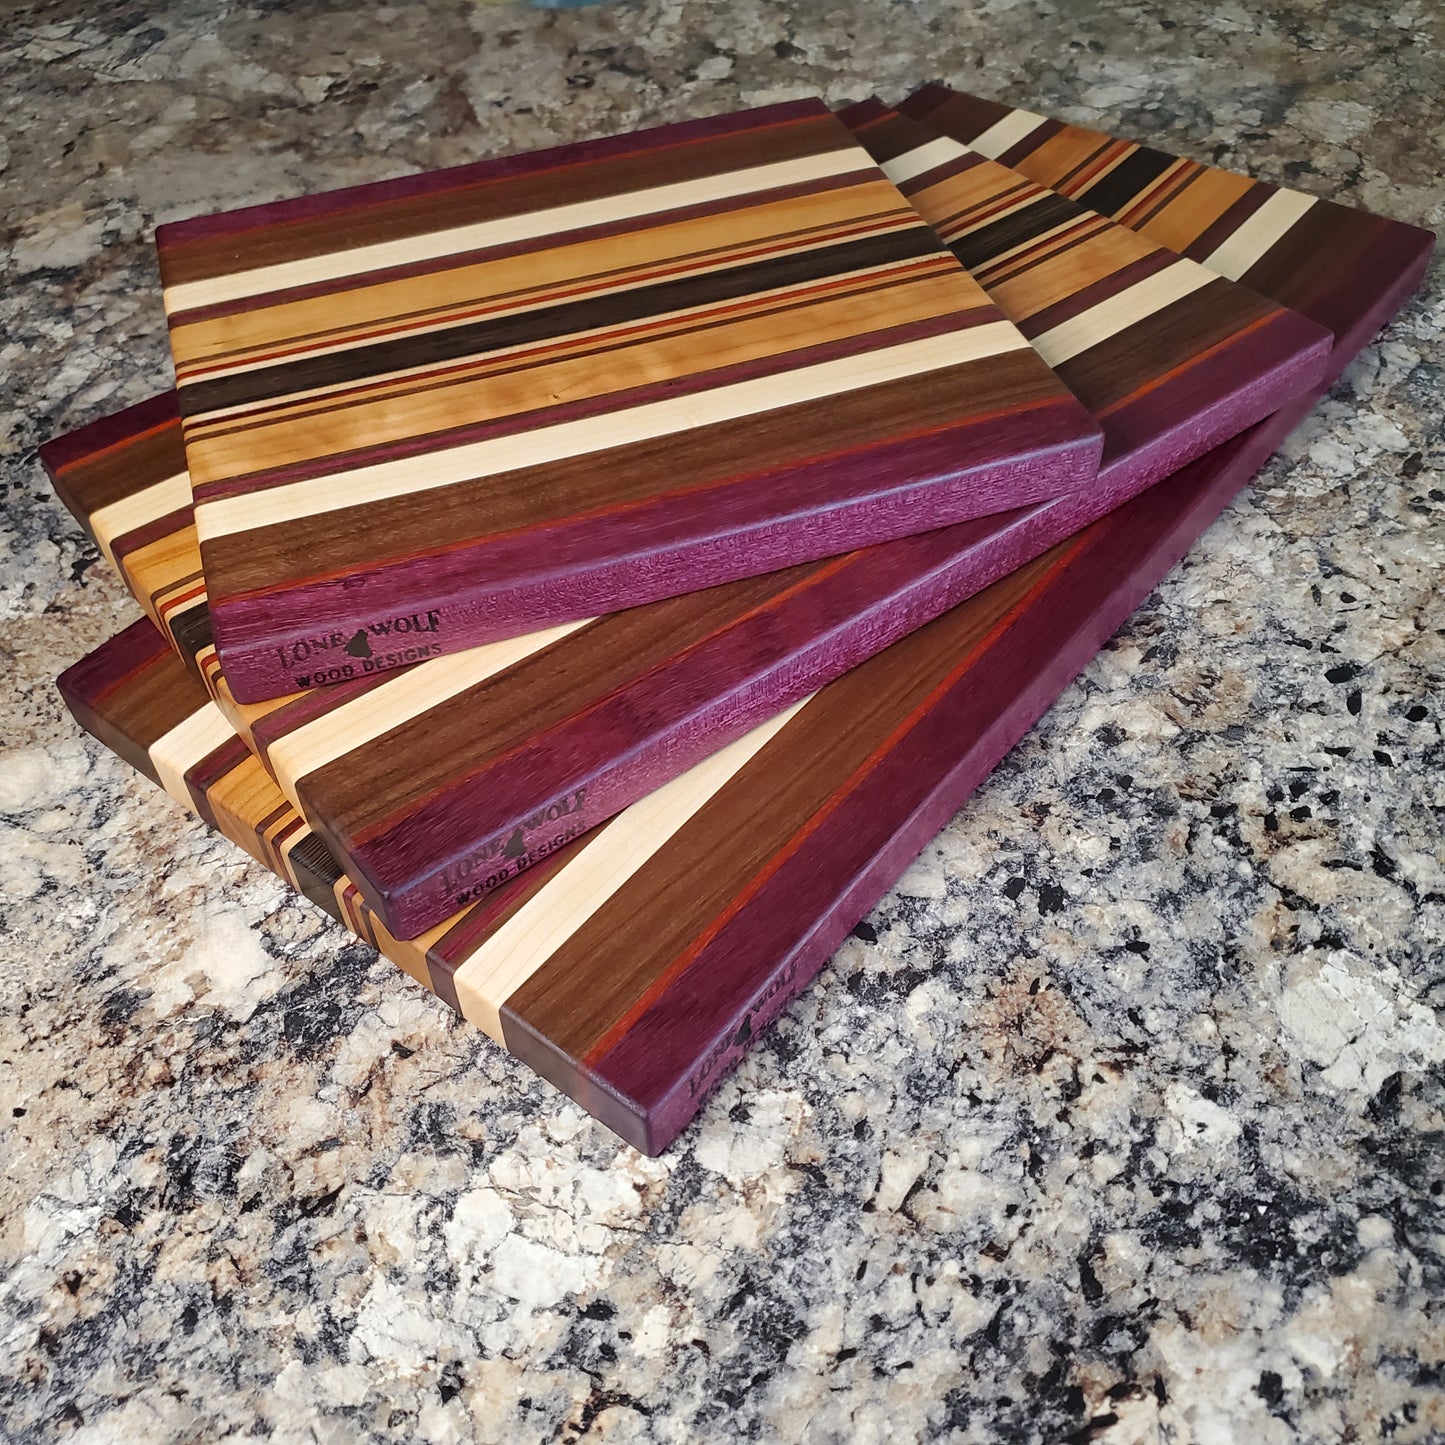 Signature Series Royalty cutting board made from maple, walnut, cherry, padauk, purple heart, and wenge by Lone Wolf Wood Designs